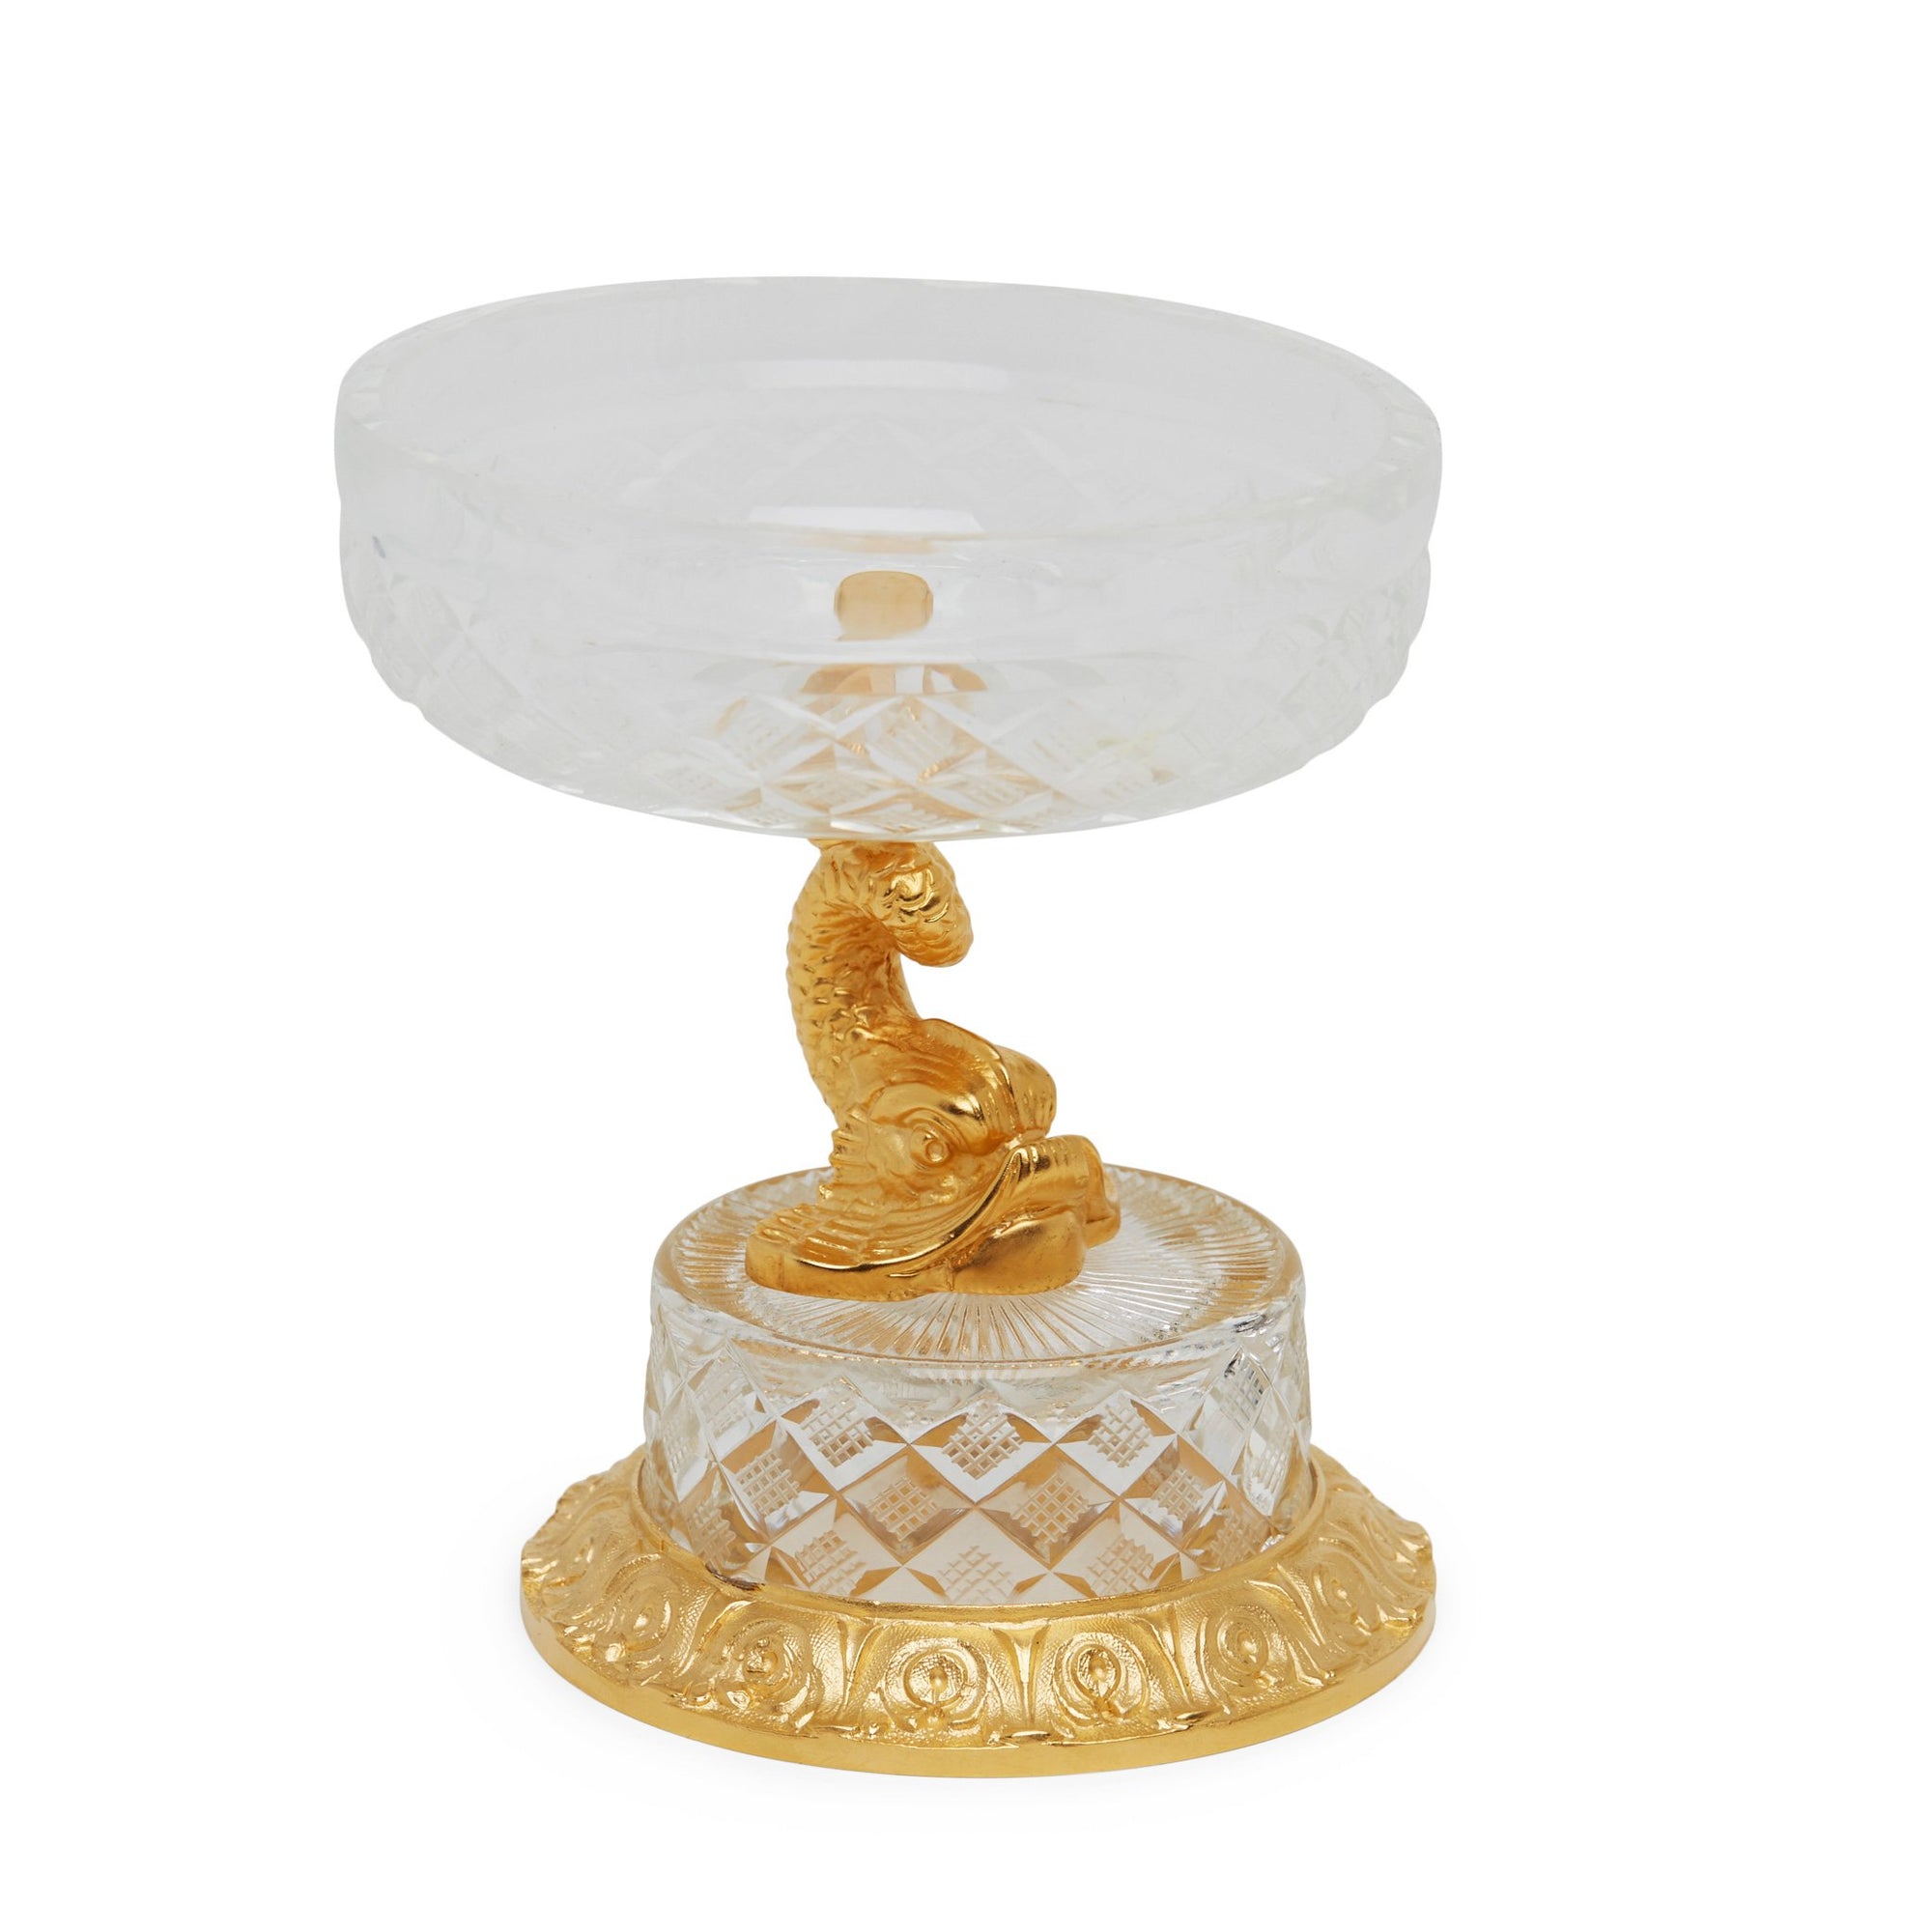 3328-GP Sherle Wagner International Dolphin Crystal Soap Dish in Gold Plate metal finish